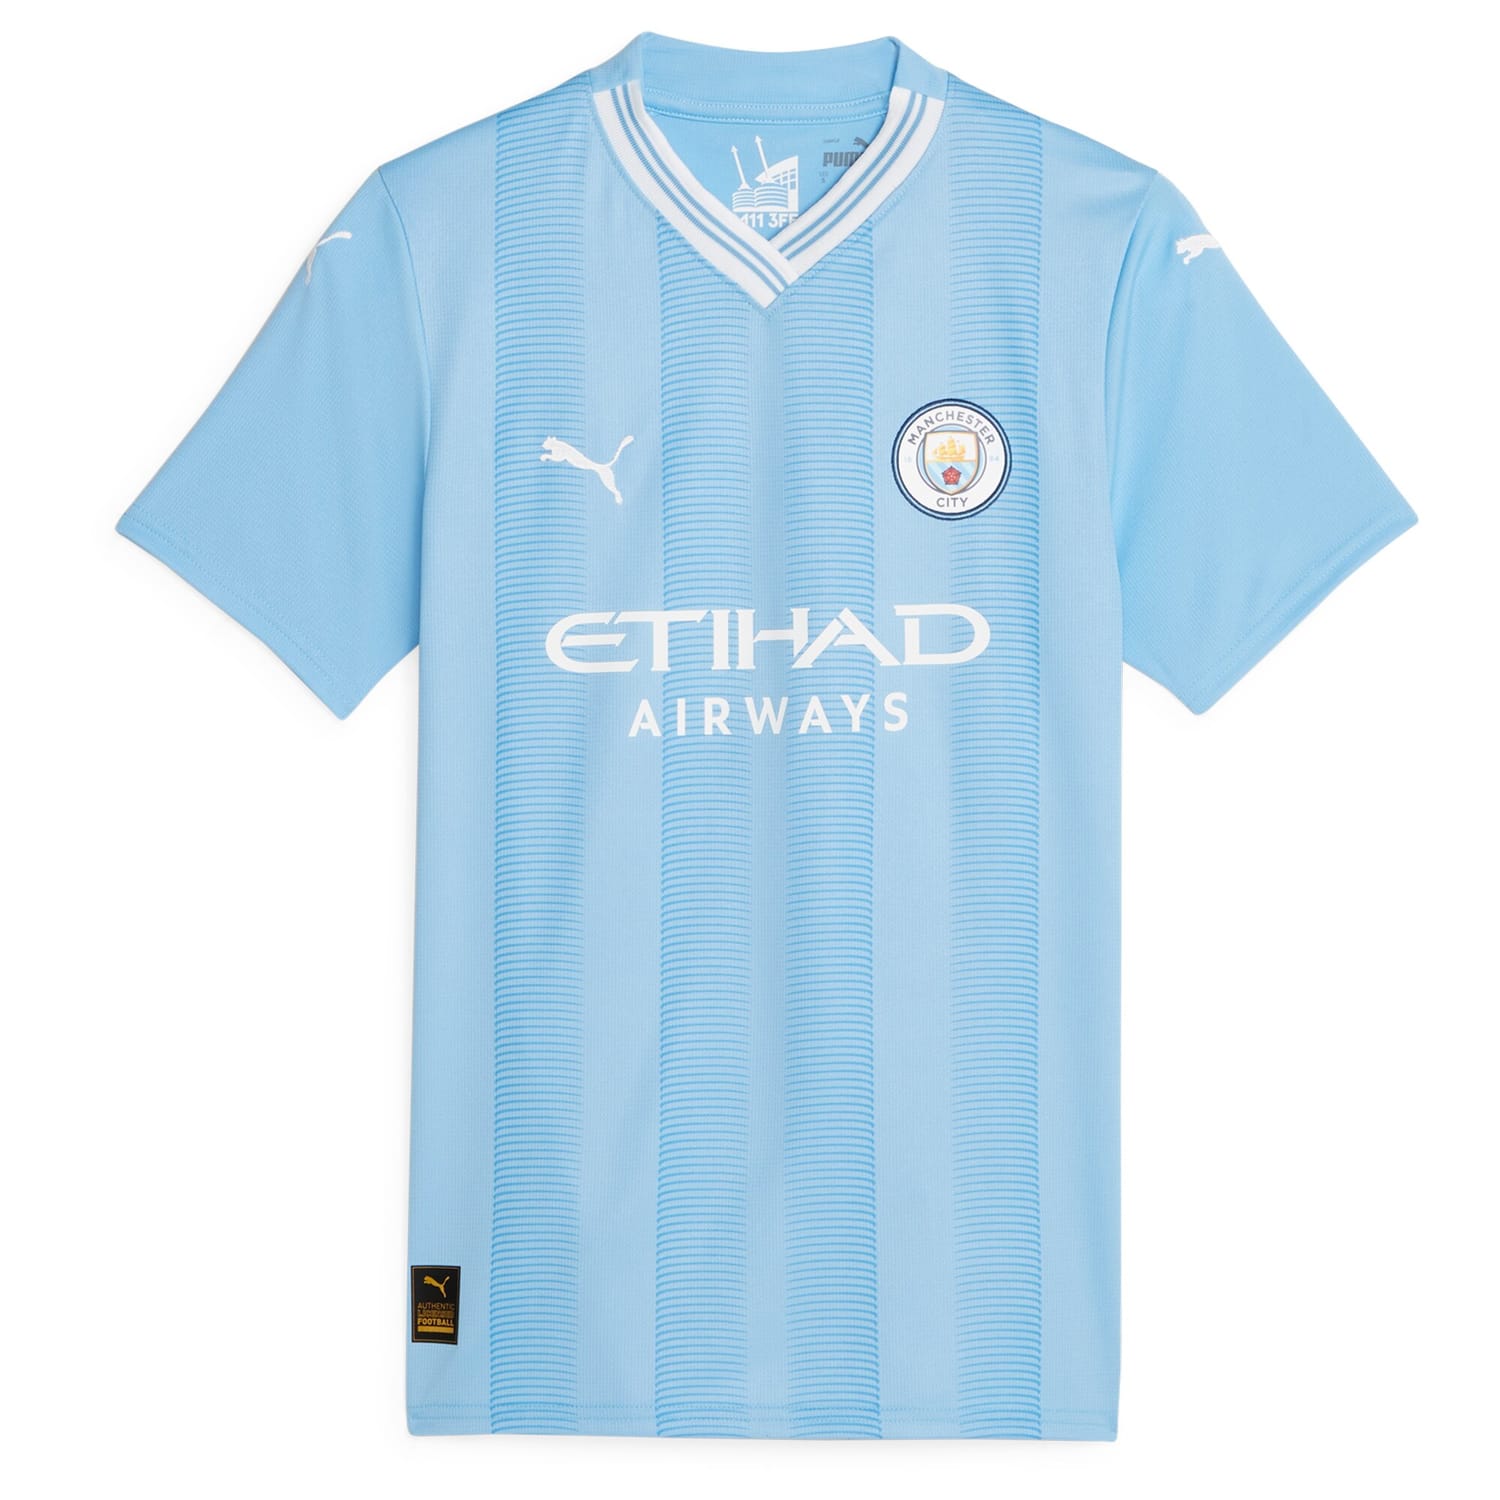 Premier League Champions Manchester City Home Jersey Shirt 2023-24 player Champions of Europe 23 printing for Women